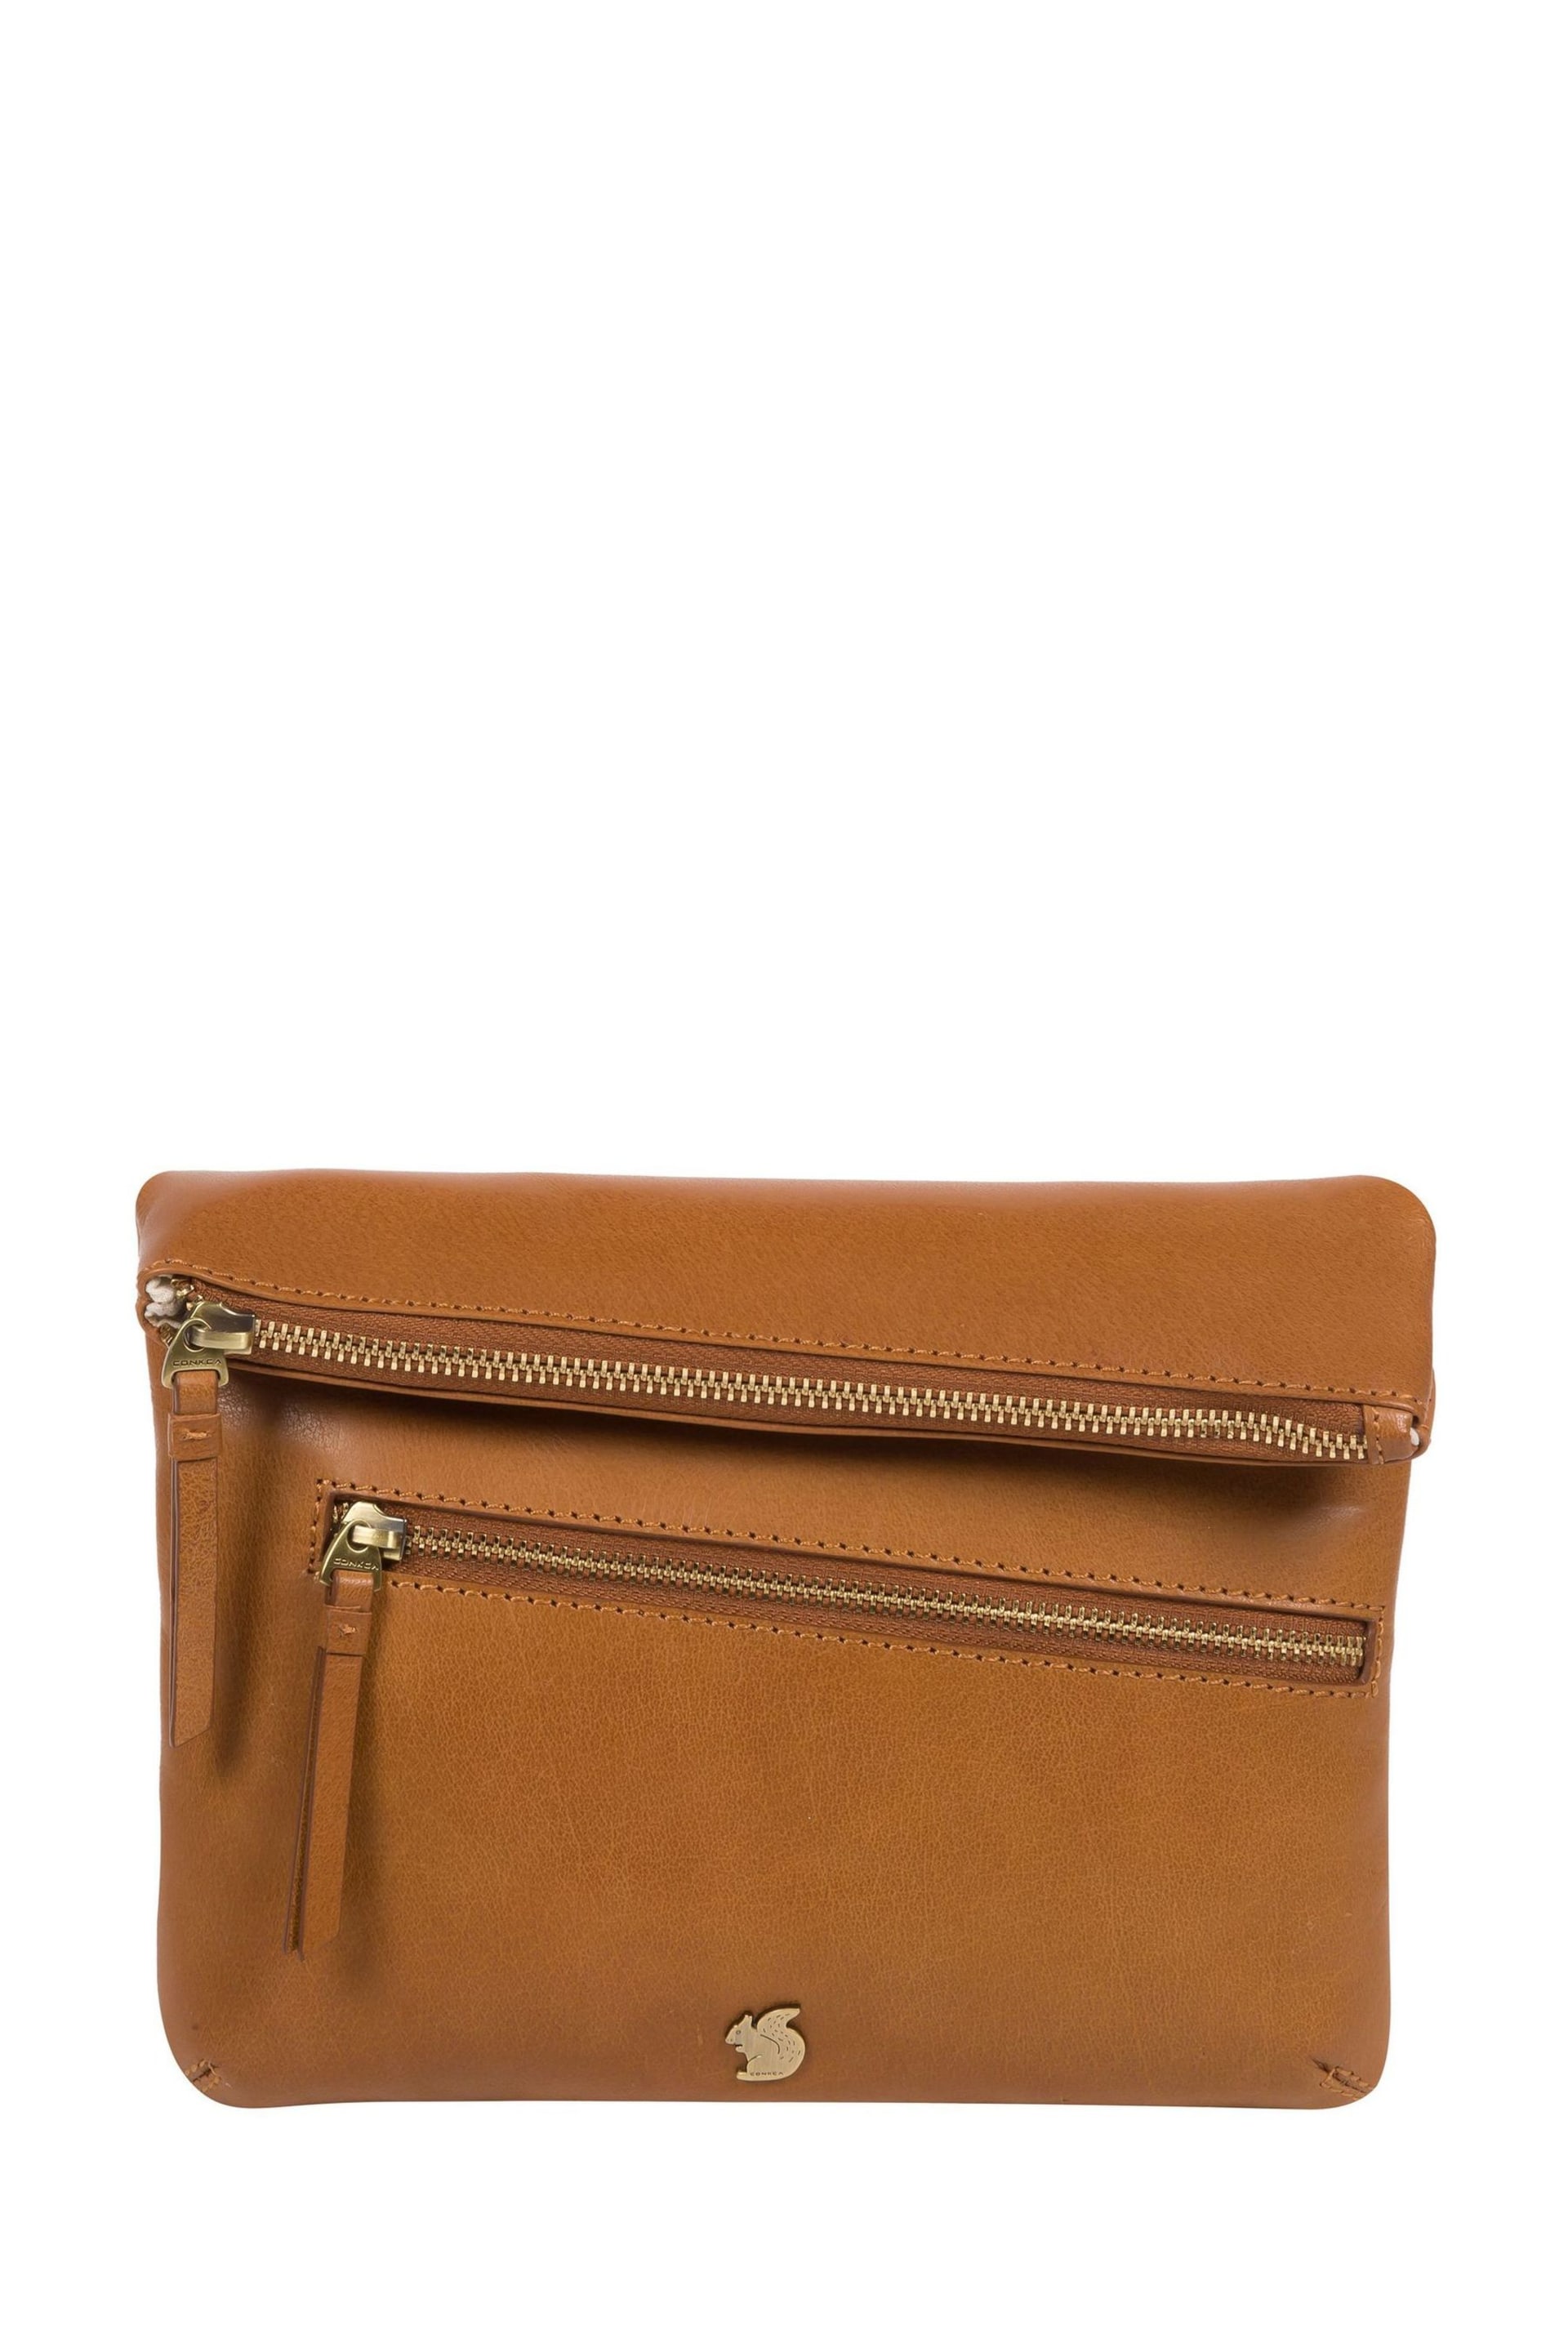 Conkca Flare Leather Clutch Bag - Image 1 of 6